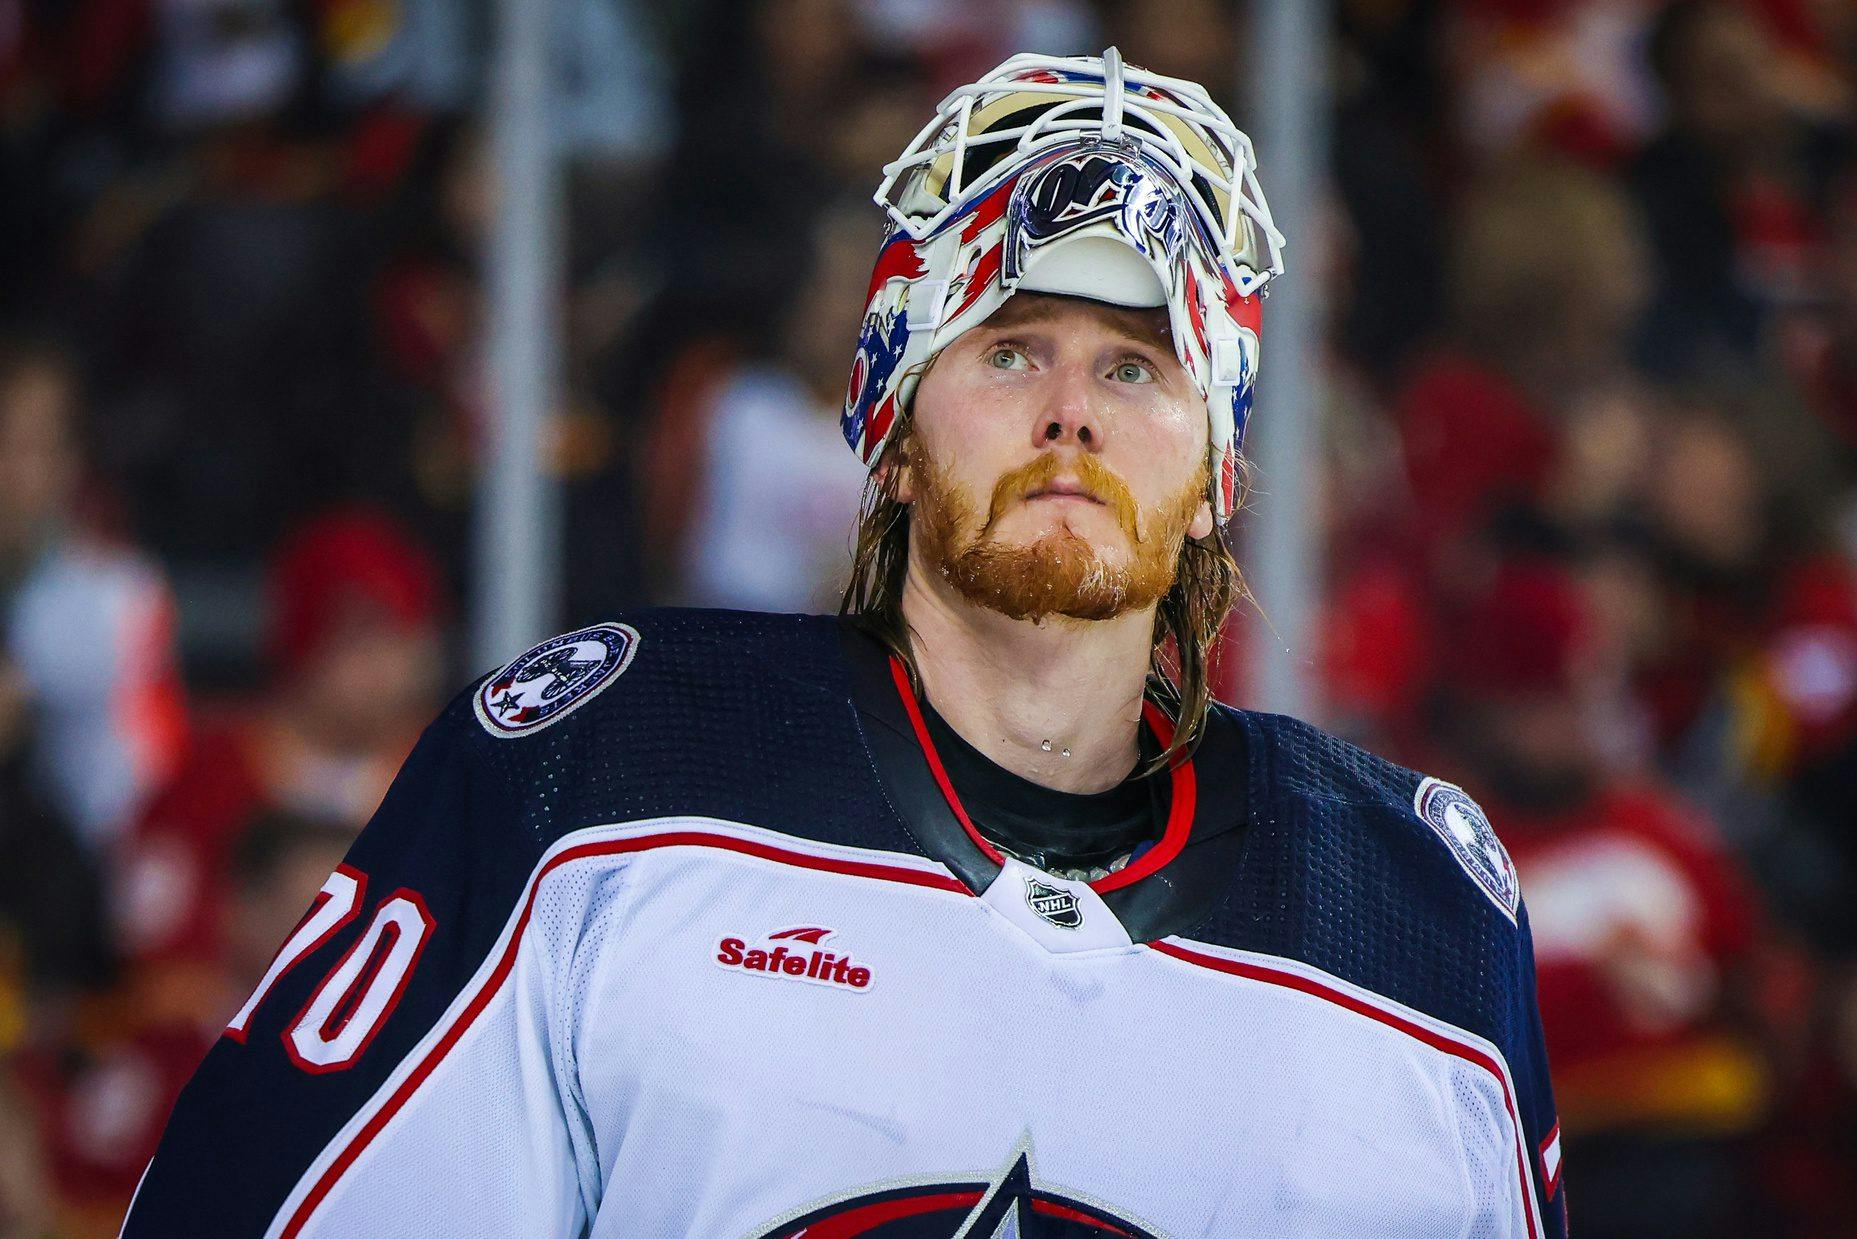 Columbus Blue Jackets scratch Joonas Korpisalo for ‘trade-related reasons’